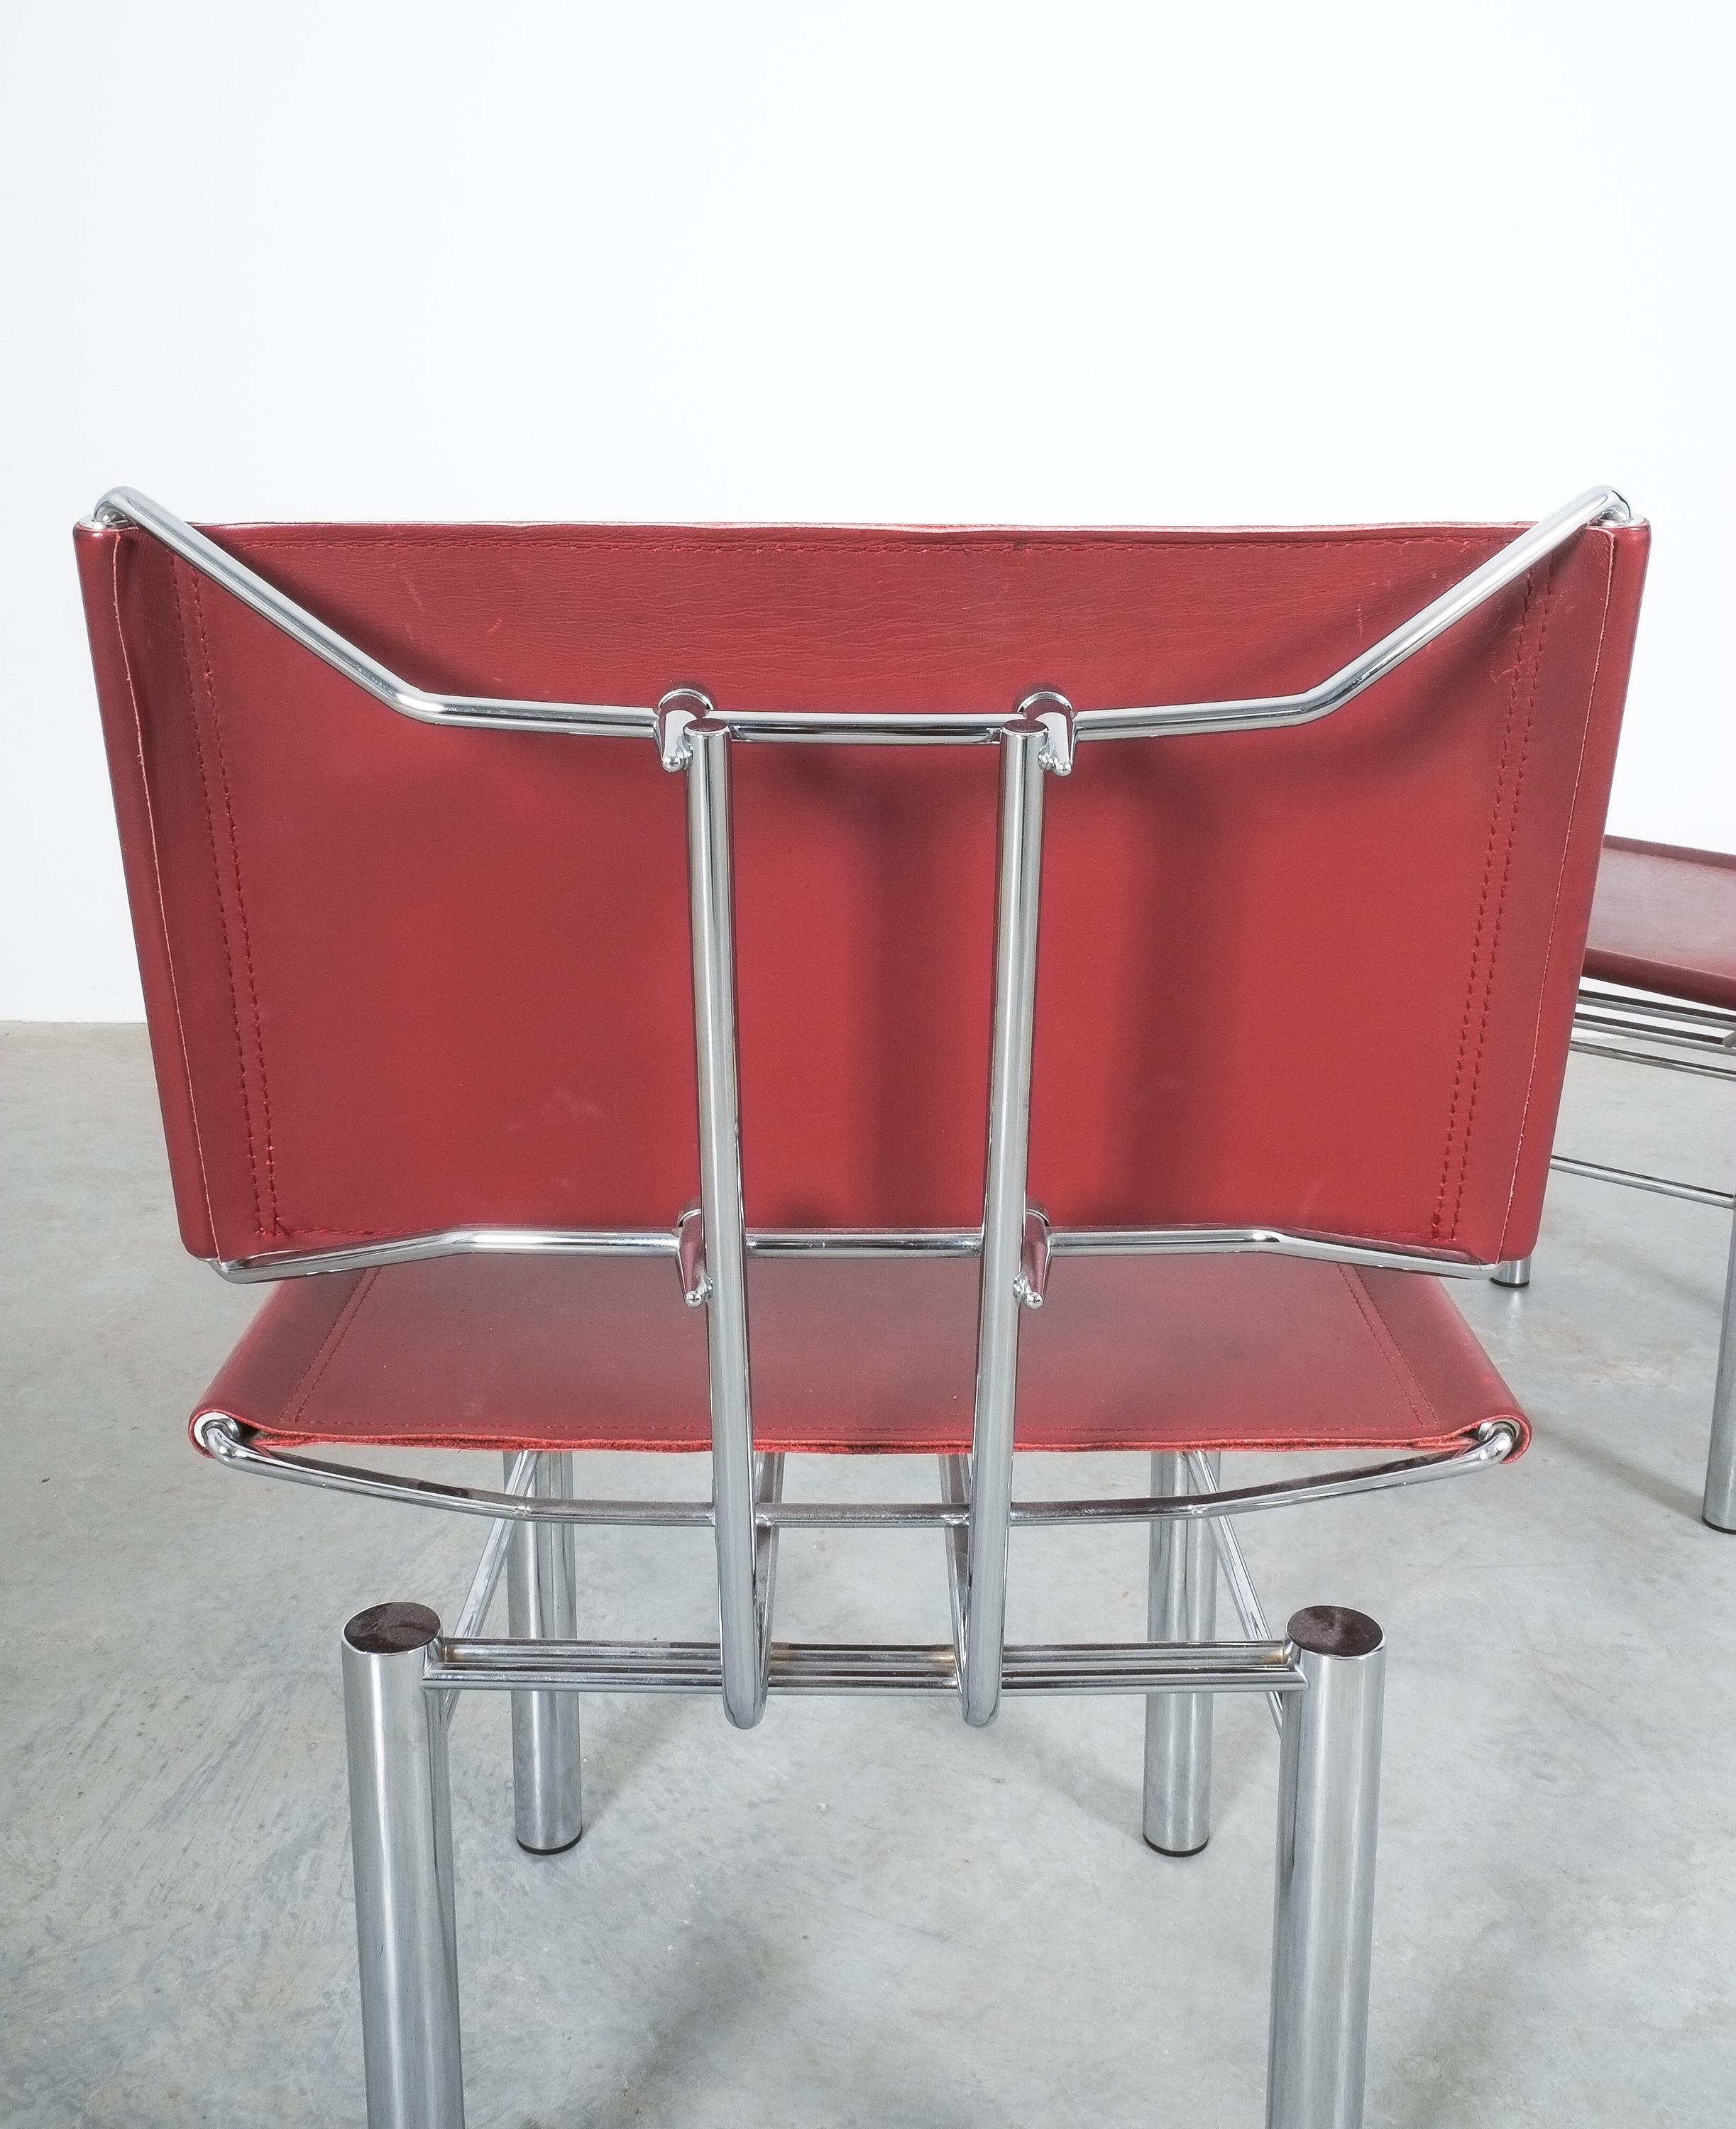 Hans Ullrich Bitsch Chairs Set of 6 Red Leather Chrome Metal Series 8600, 1980 For Sale 5